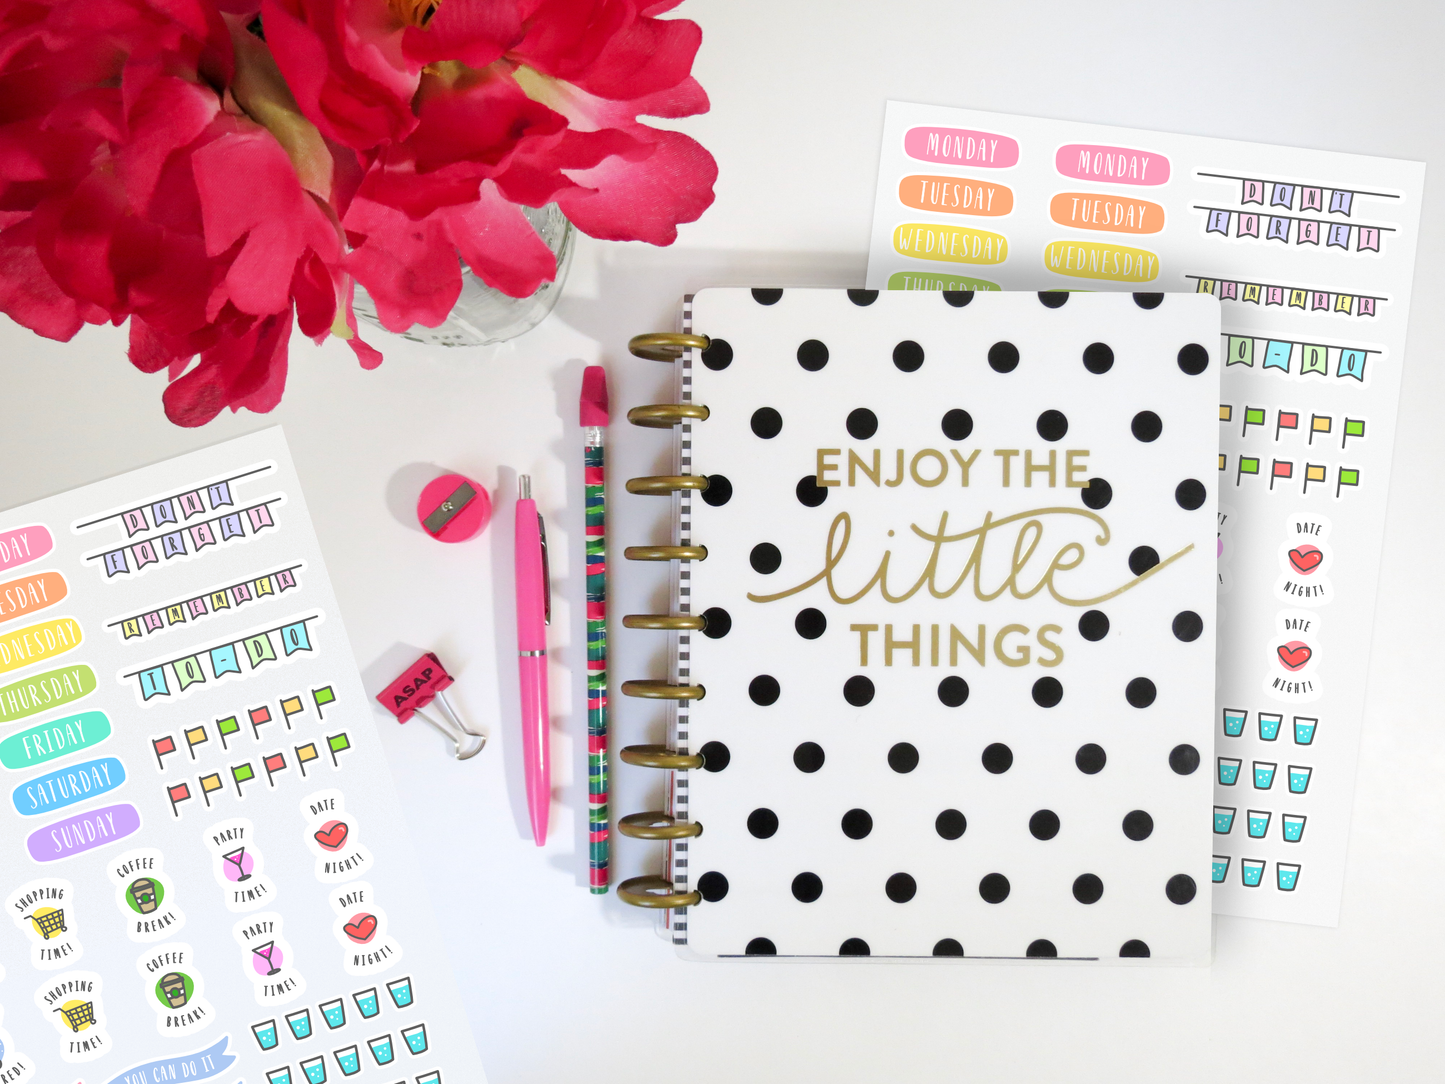 Cute Planner Stickers